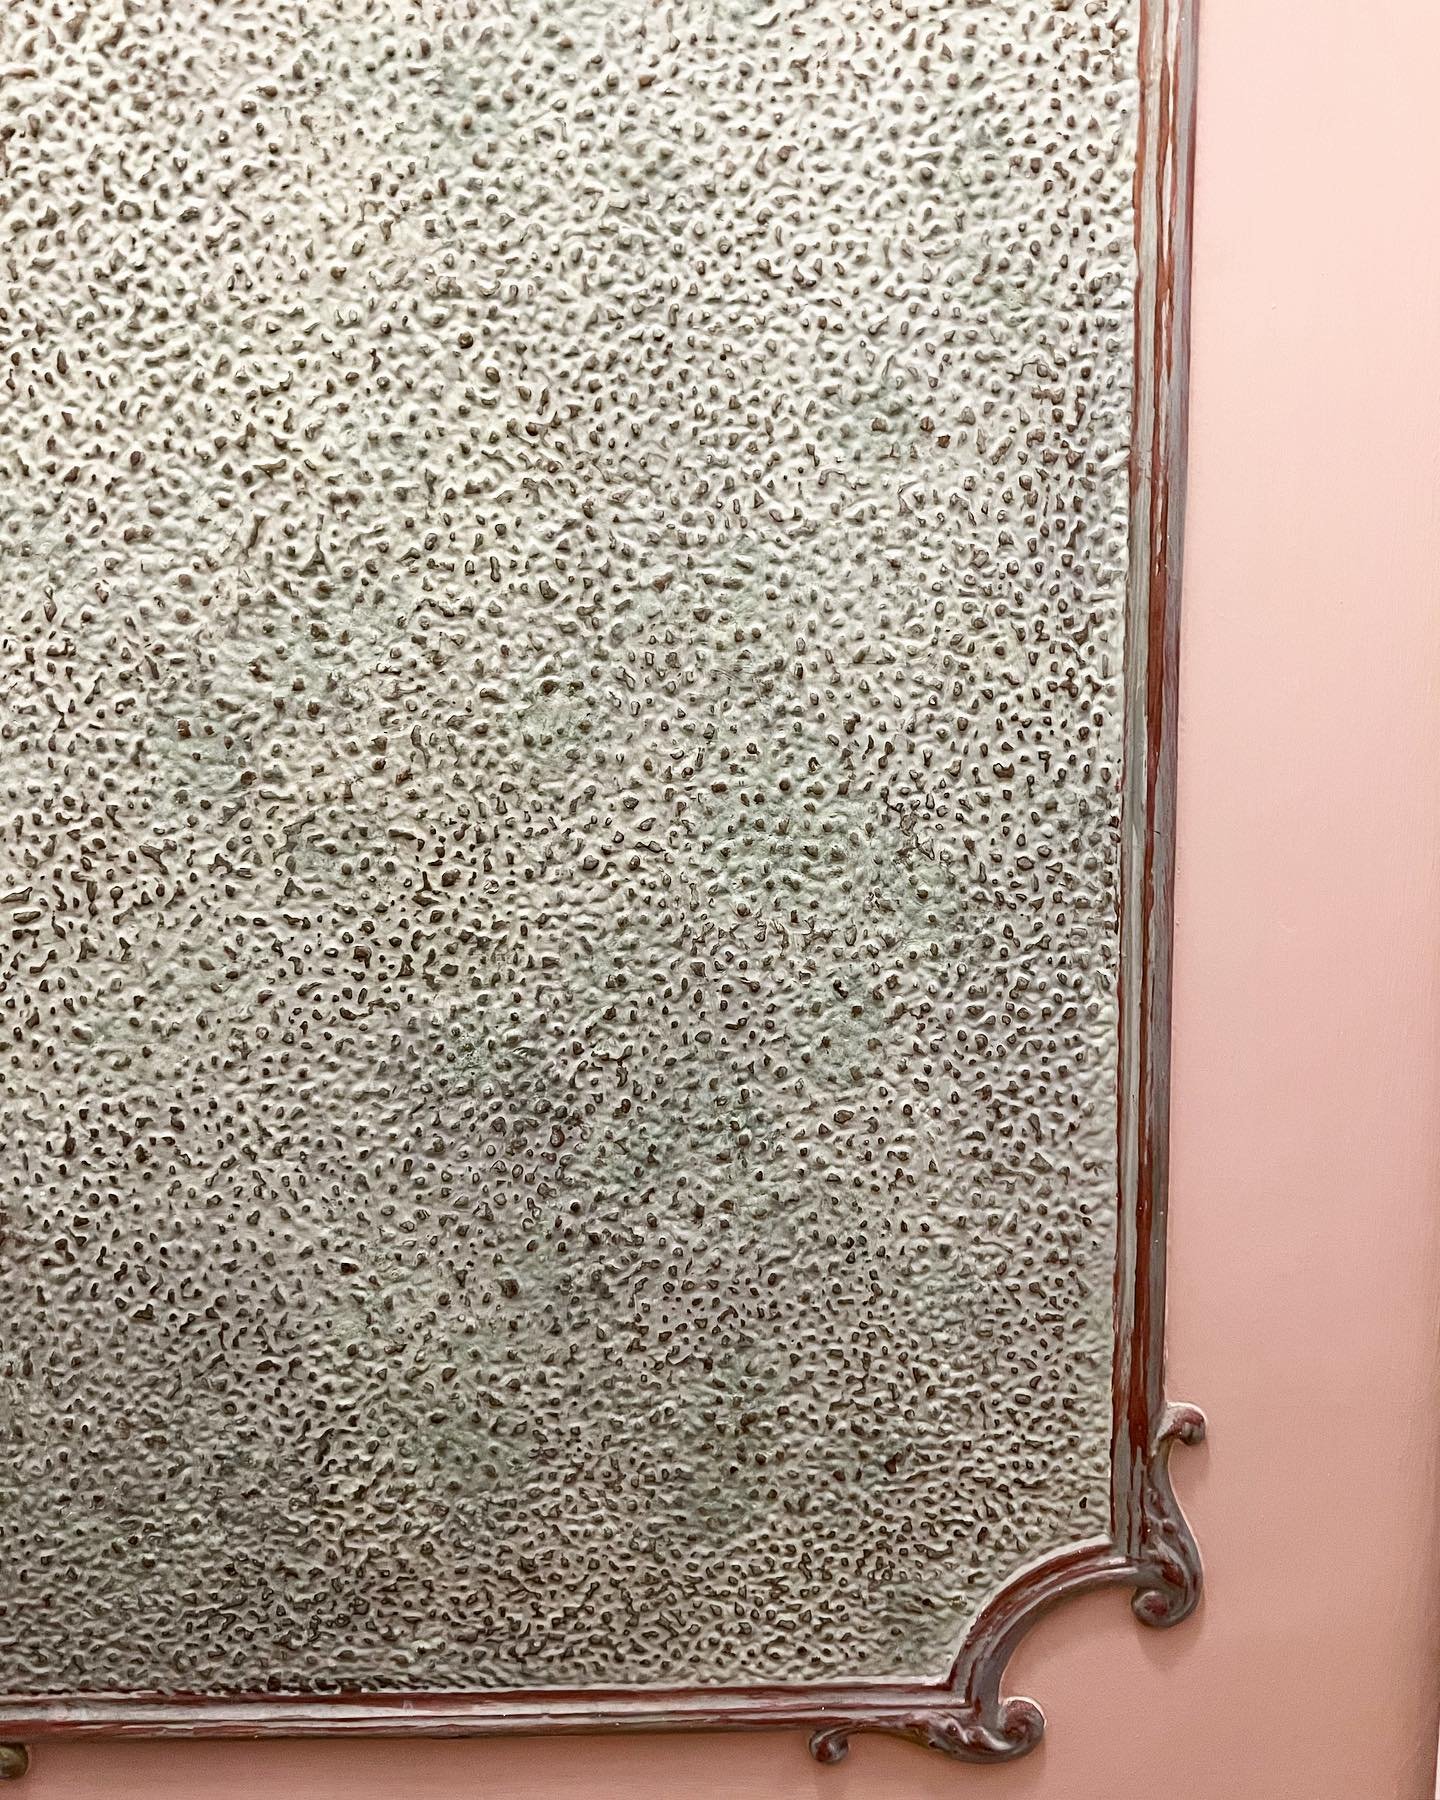 Swipe for before photos.. this unusual decorative panel had chipped and cracked over the years and was in need of some repairs. I used a decorative fine filler to rebuild the texture on damaged areas and then painted with layers of glazes to blend it